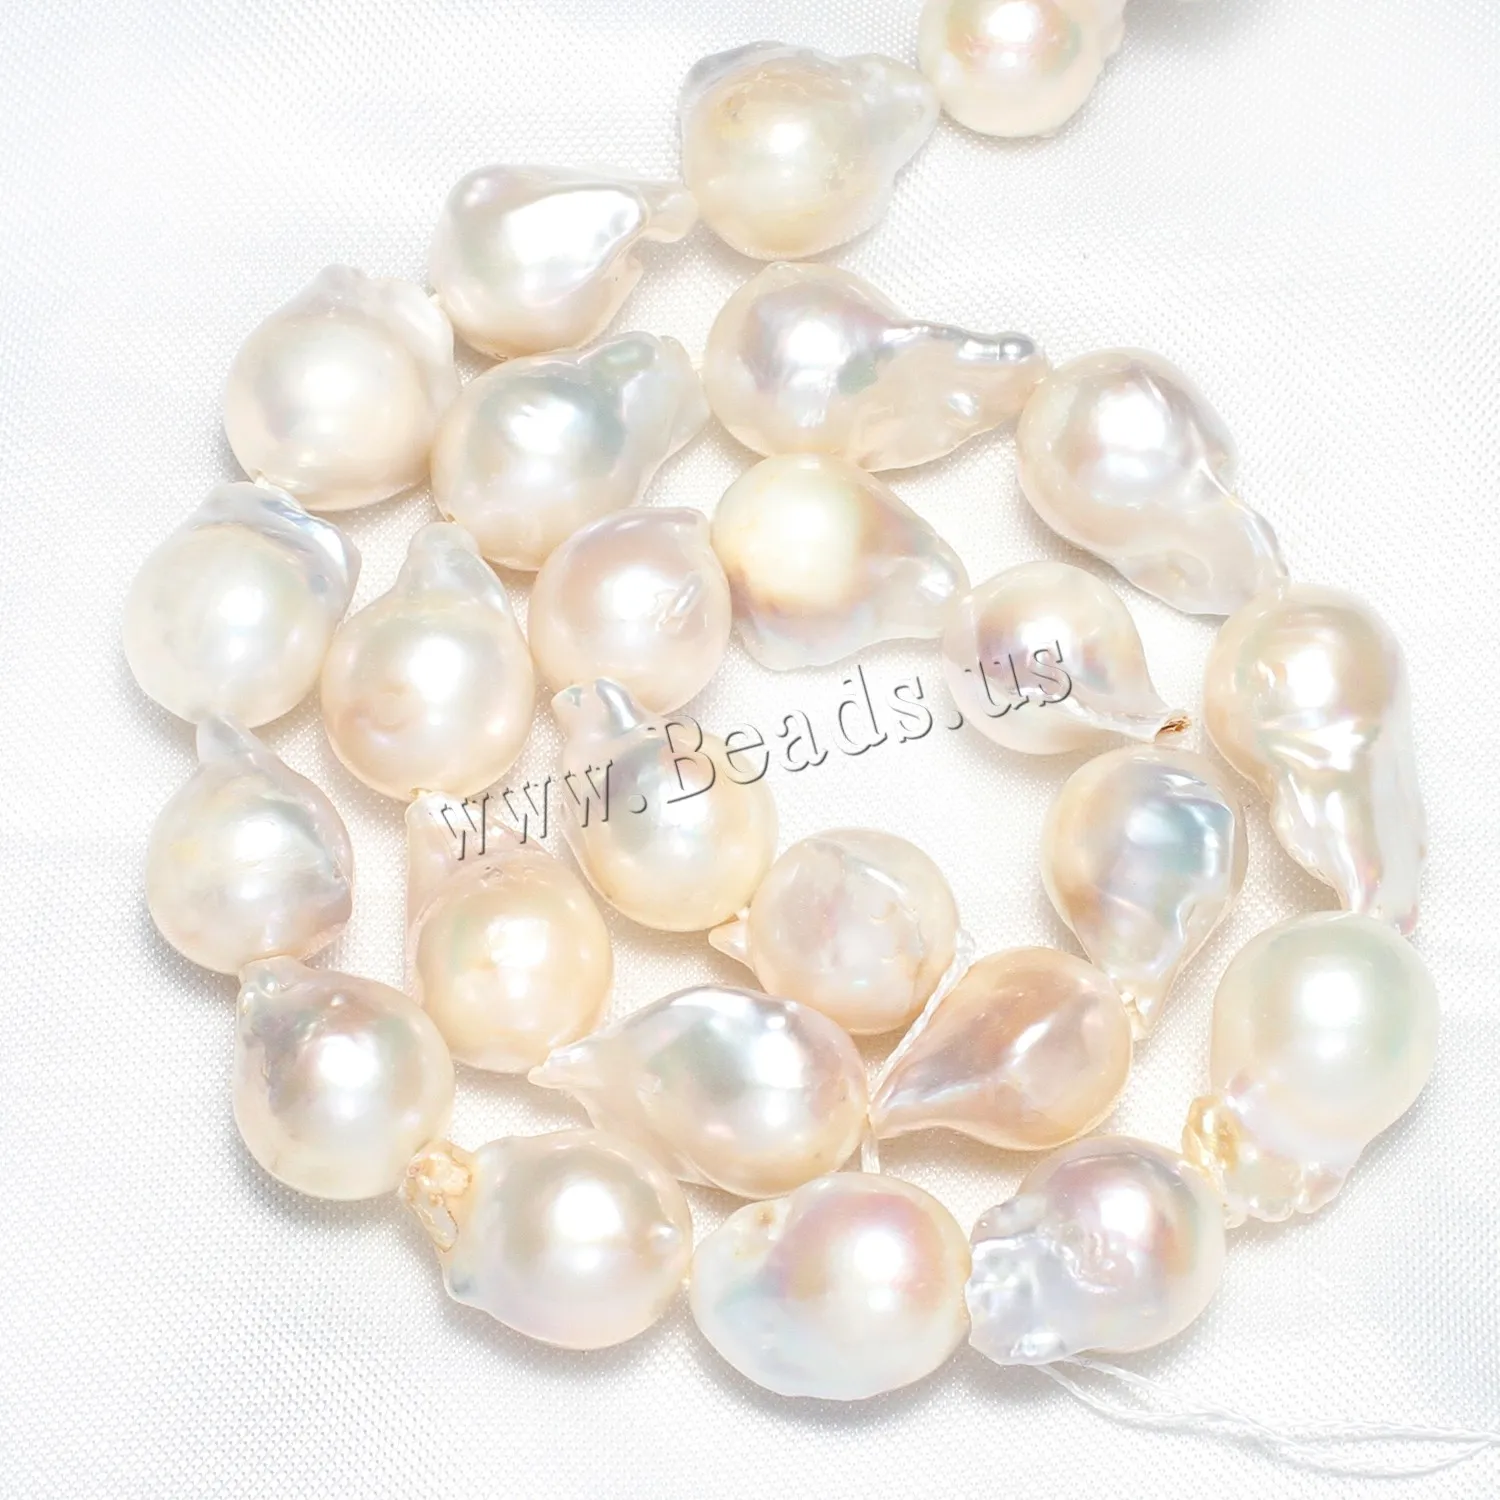 

11-14mm Irregular Pearl Beads Big Size Cultured Freshwater White Flameball Baroque Pearls 0.8mm Hole Fit Bracelet Jewelry Making